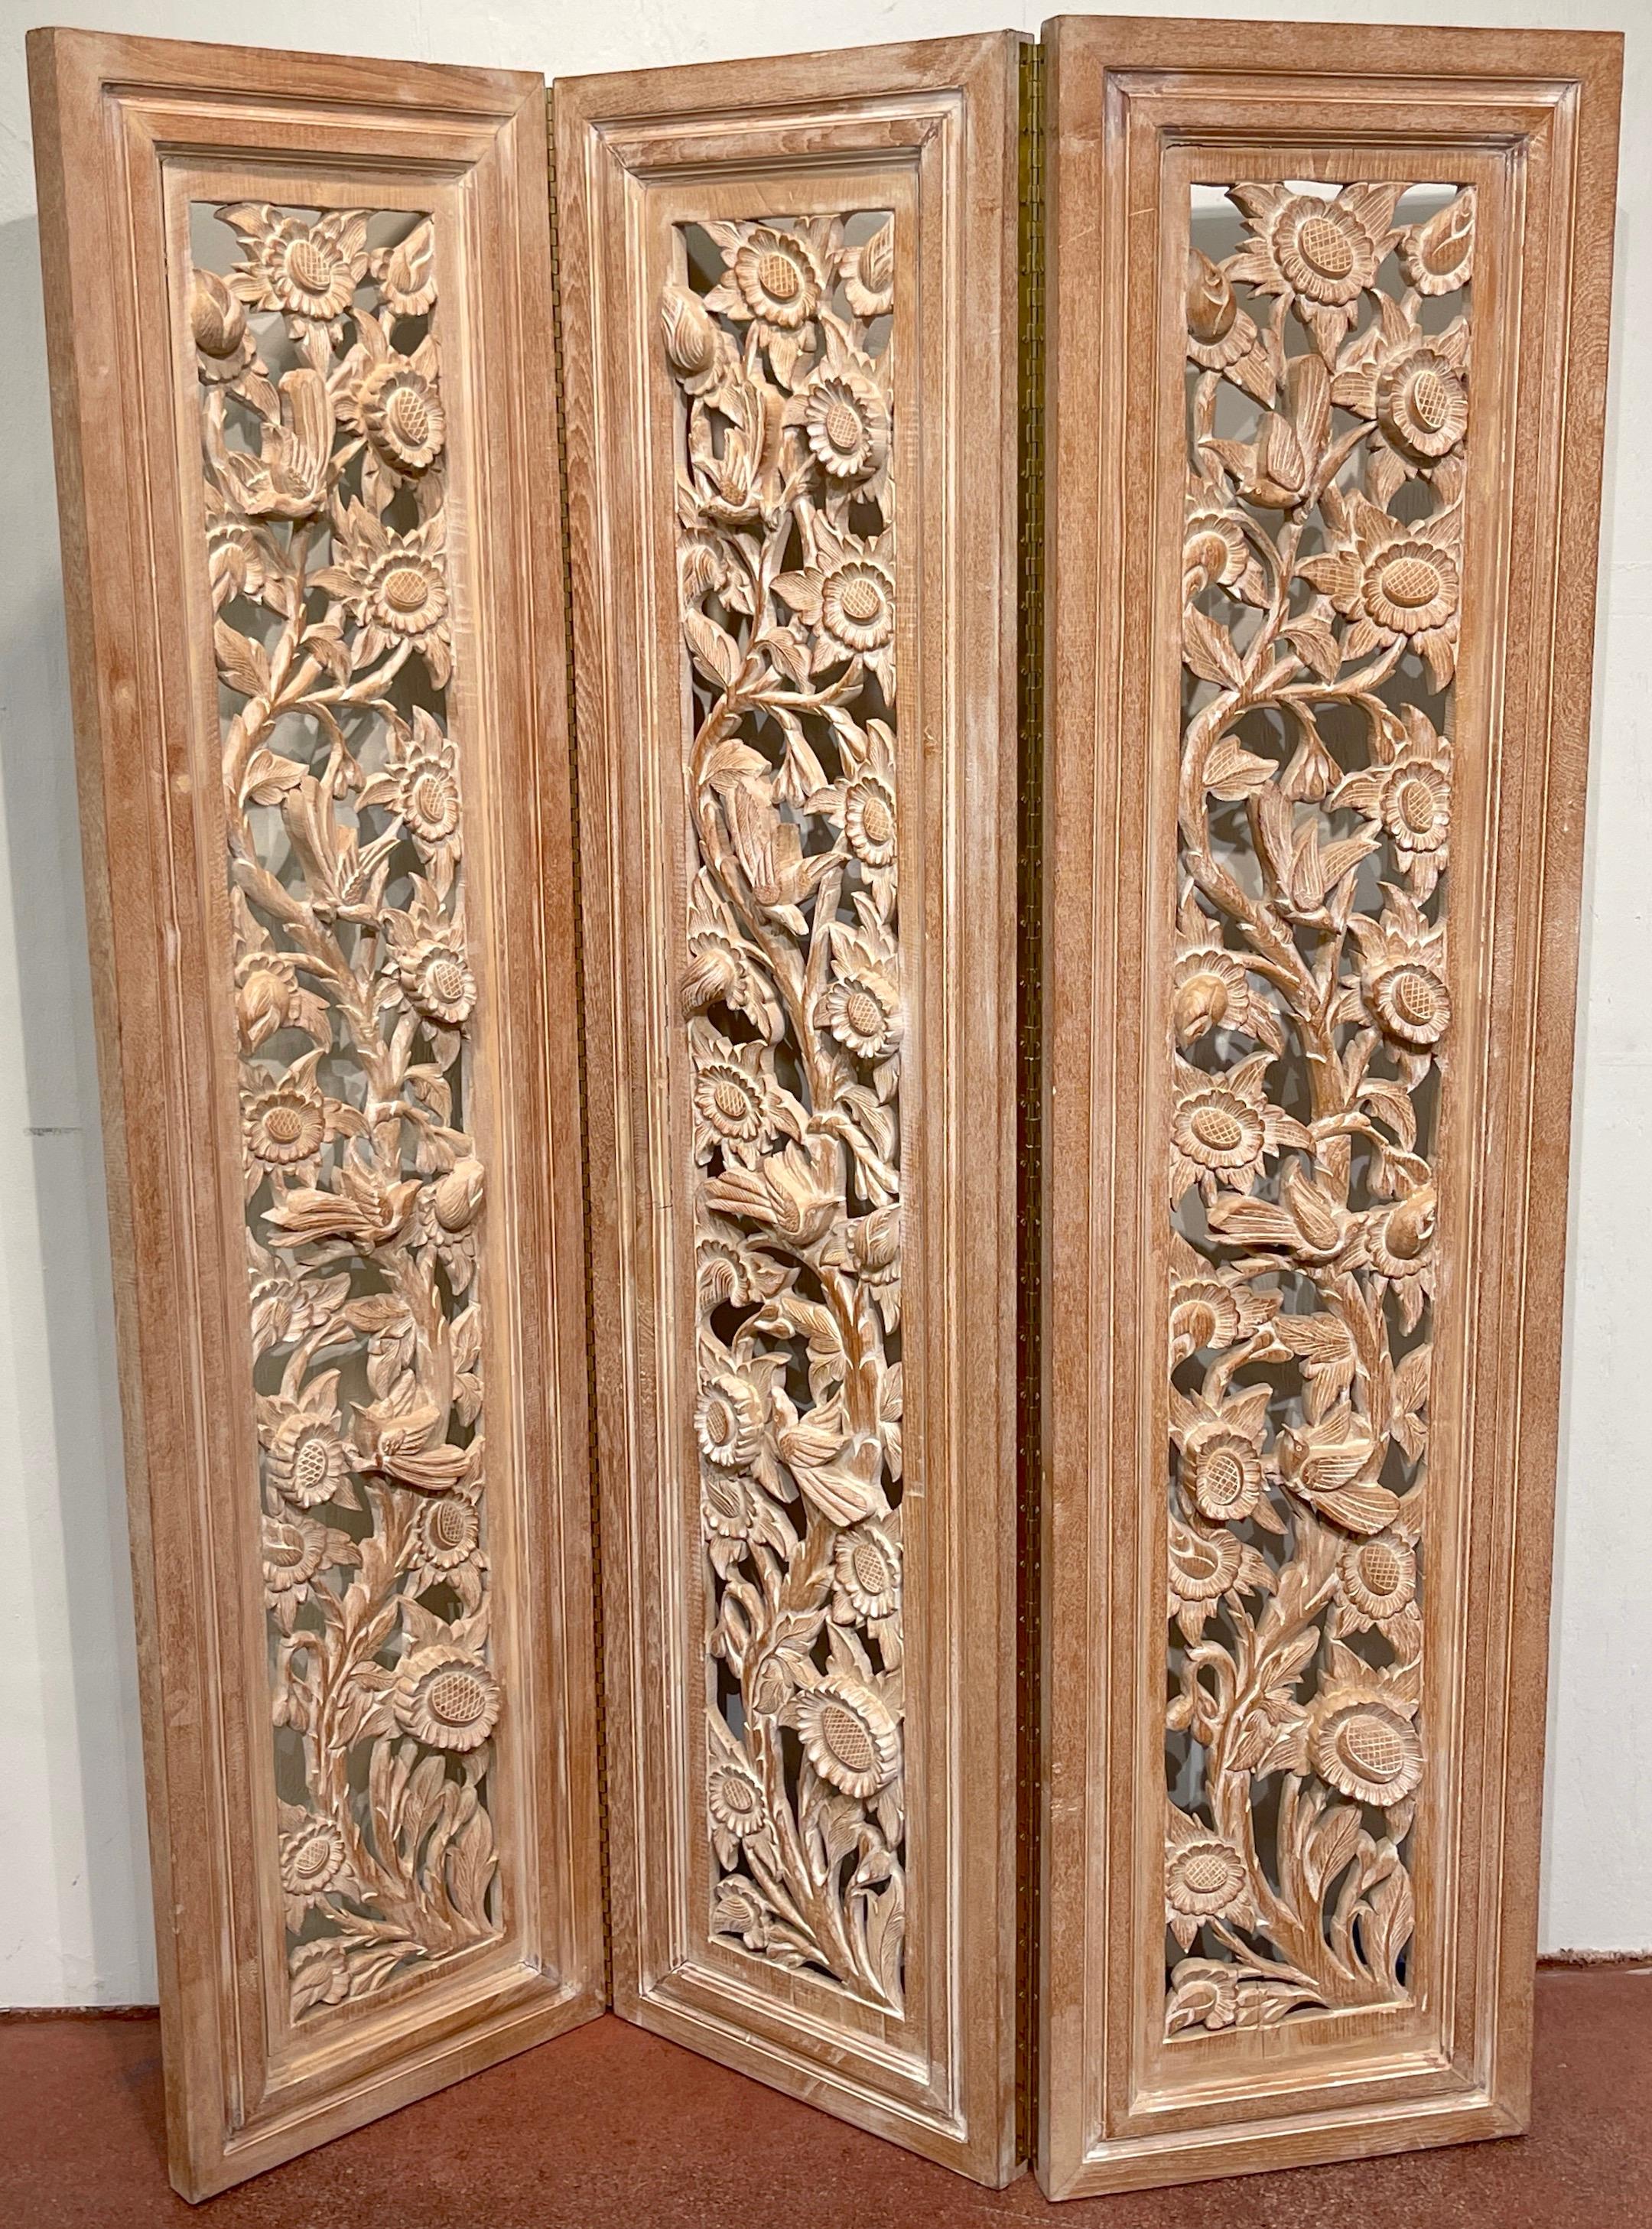 Three-Panel Carved Bleached Hardwood Bird Floral Screen, Style of James Mont 
Circa 1950s

An Exquisite Three-Panel Carved Bleached Hardwood Bird Floral Screen, Step into the elegance of the 1950s with this captivating carved hardwood screen,